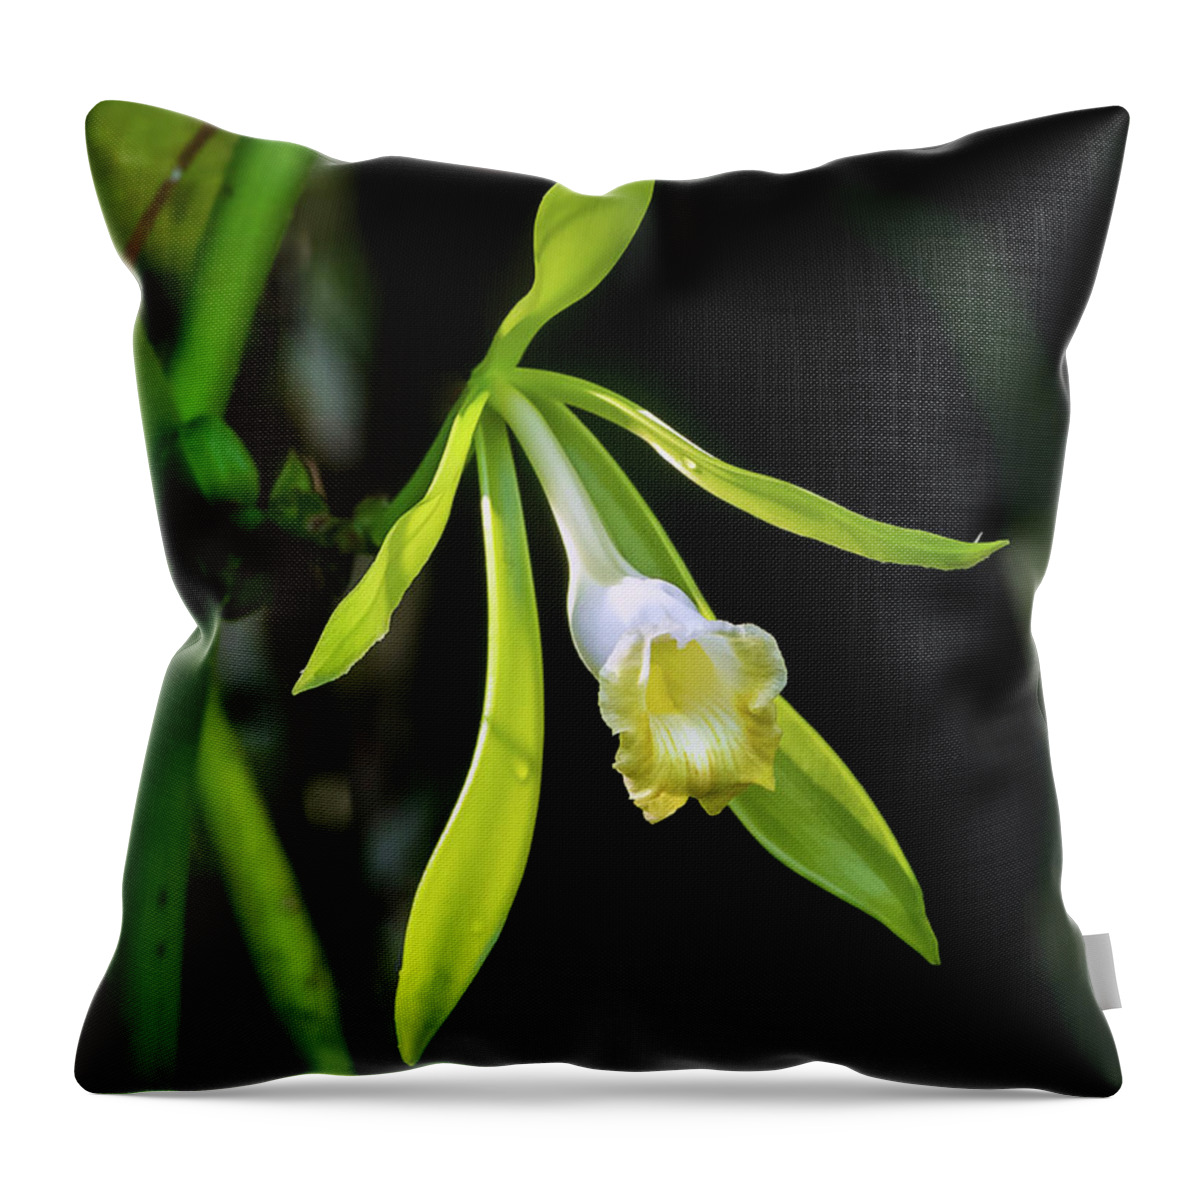 Fakahatchee Strand State Preserve Throw Pillow featuring the photograph Vanilla Orchid Flower by Rudy Wilms